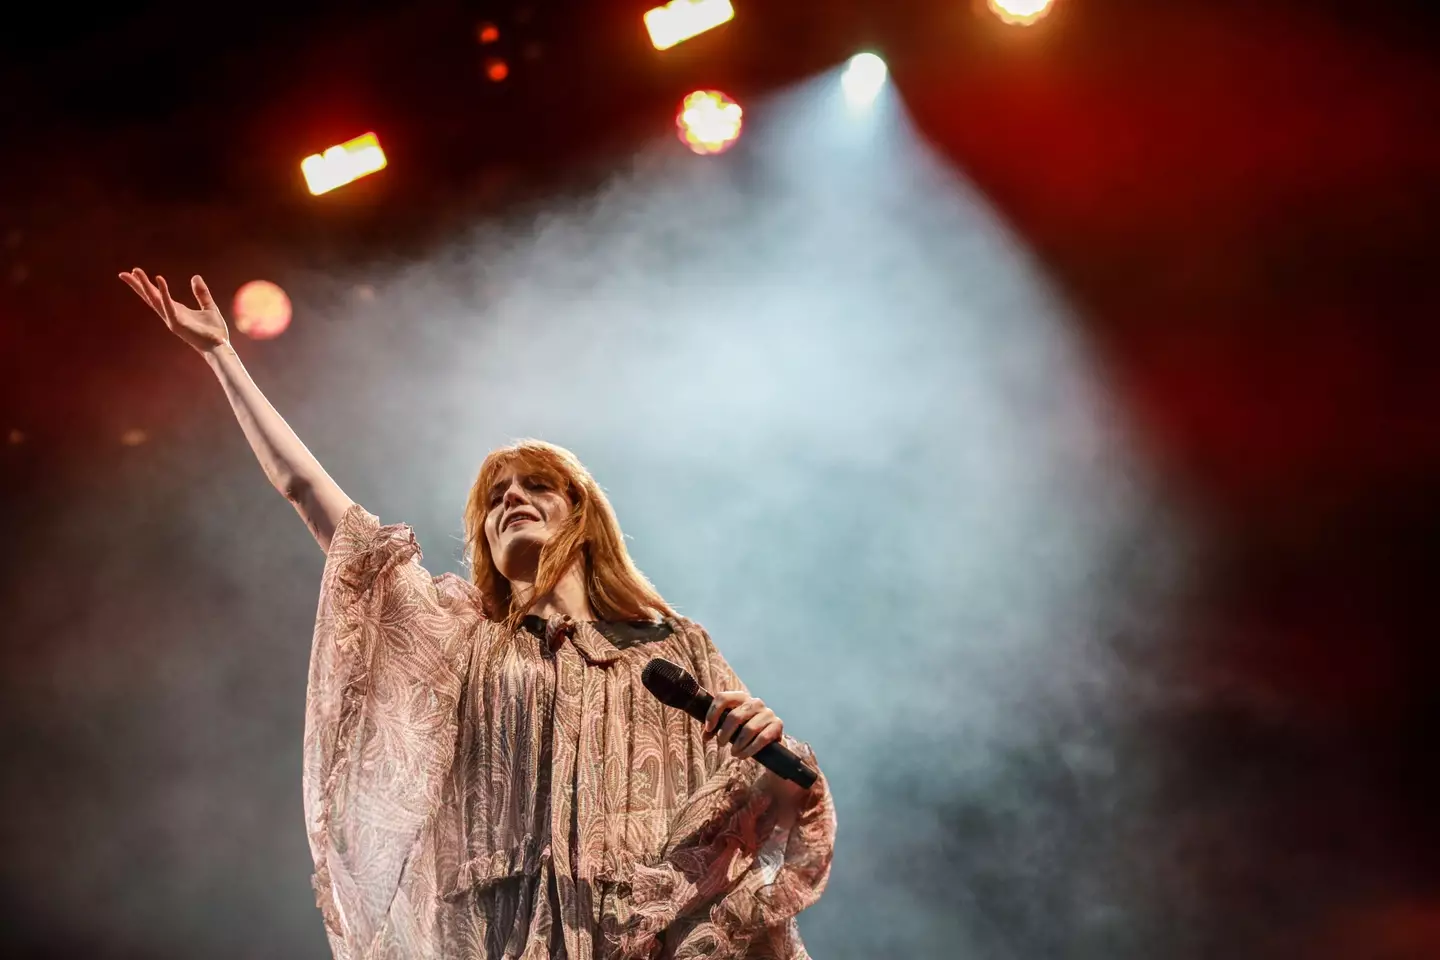 Florence Welch promised fans she'd finisher her tour soon.